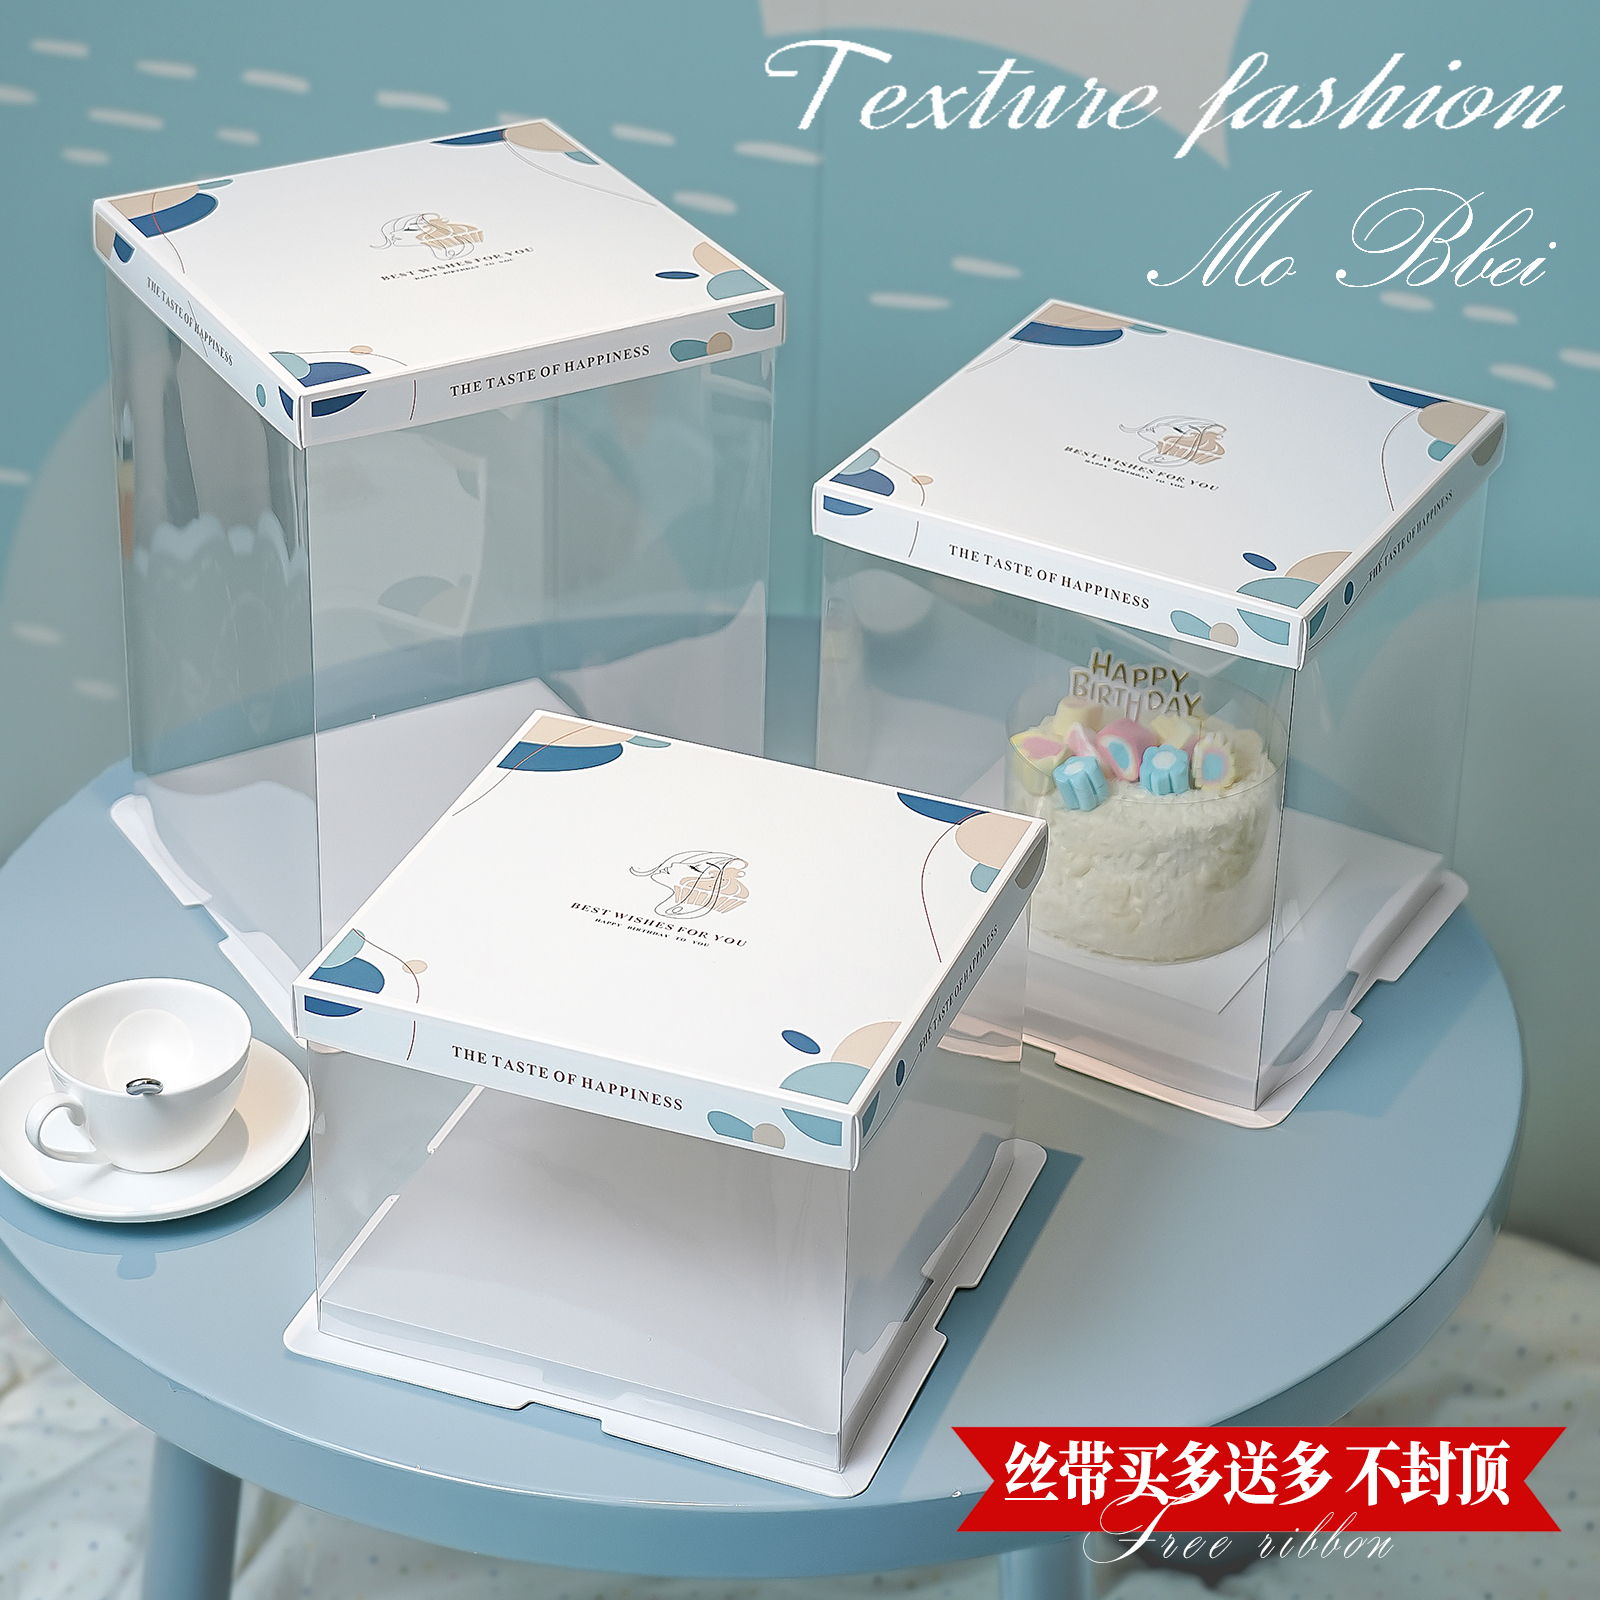 Transparent birthday cake box 6 inch 6 inch 6 8 8 100 12 inch double layer plus high square hand packaging box translucent-Taobao